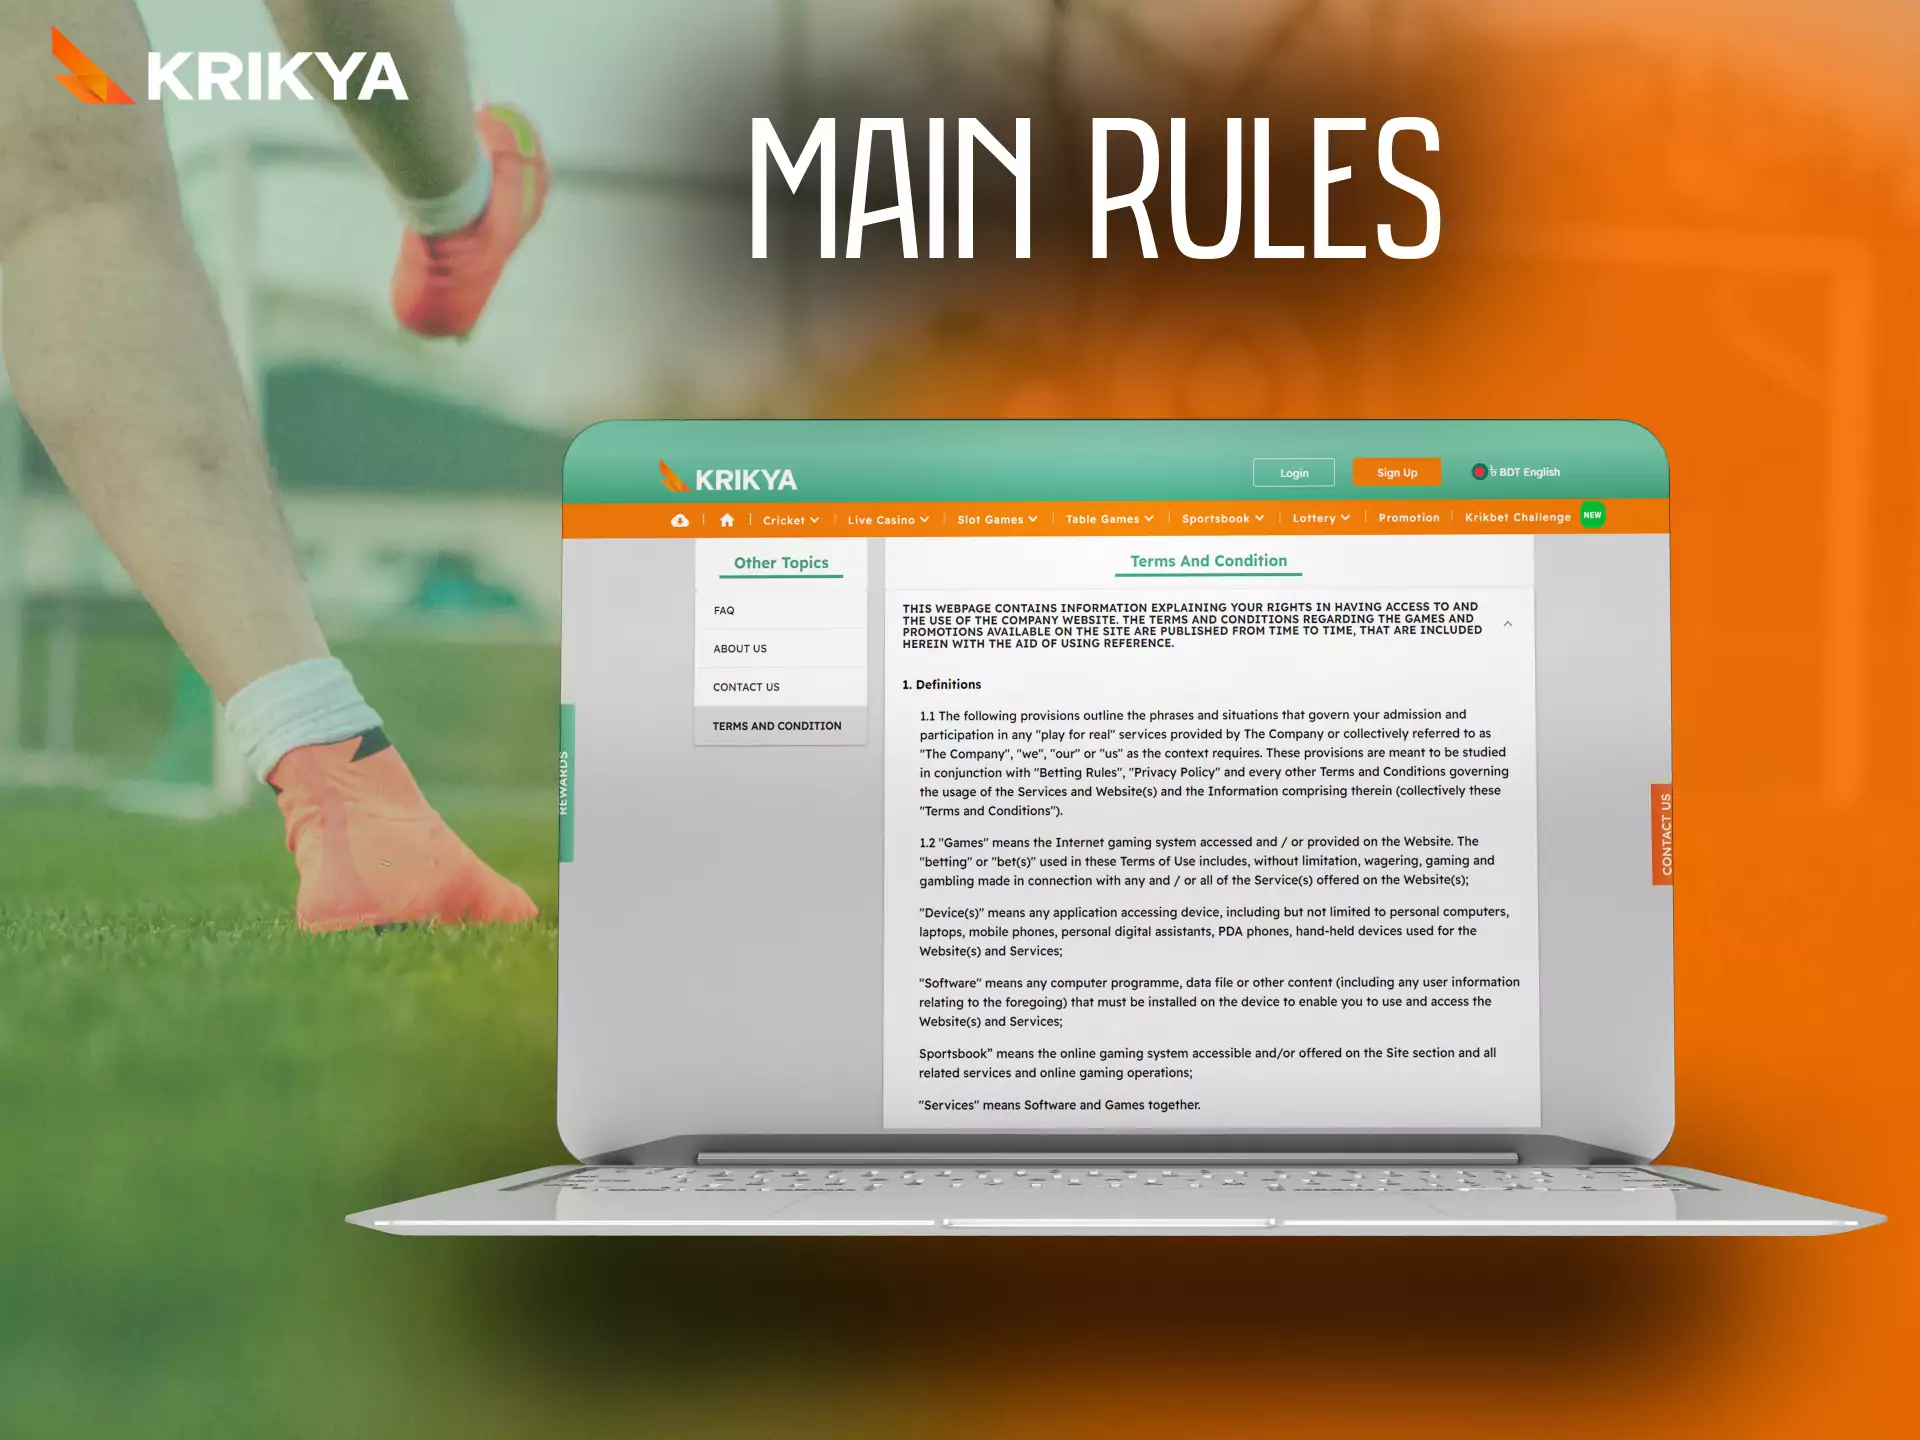 Read the main rules of Krikya, use the service more efficiently.